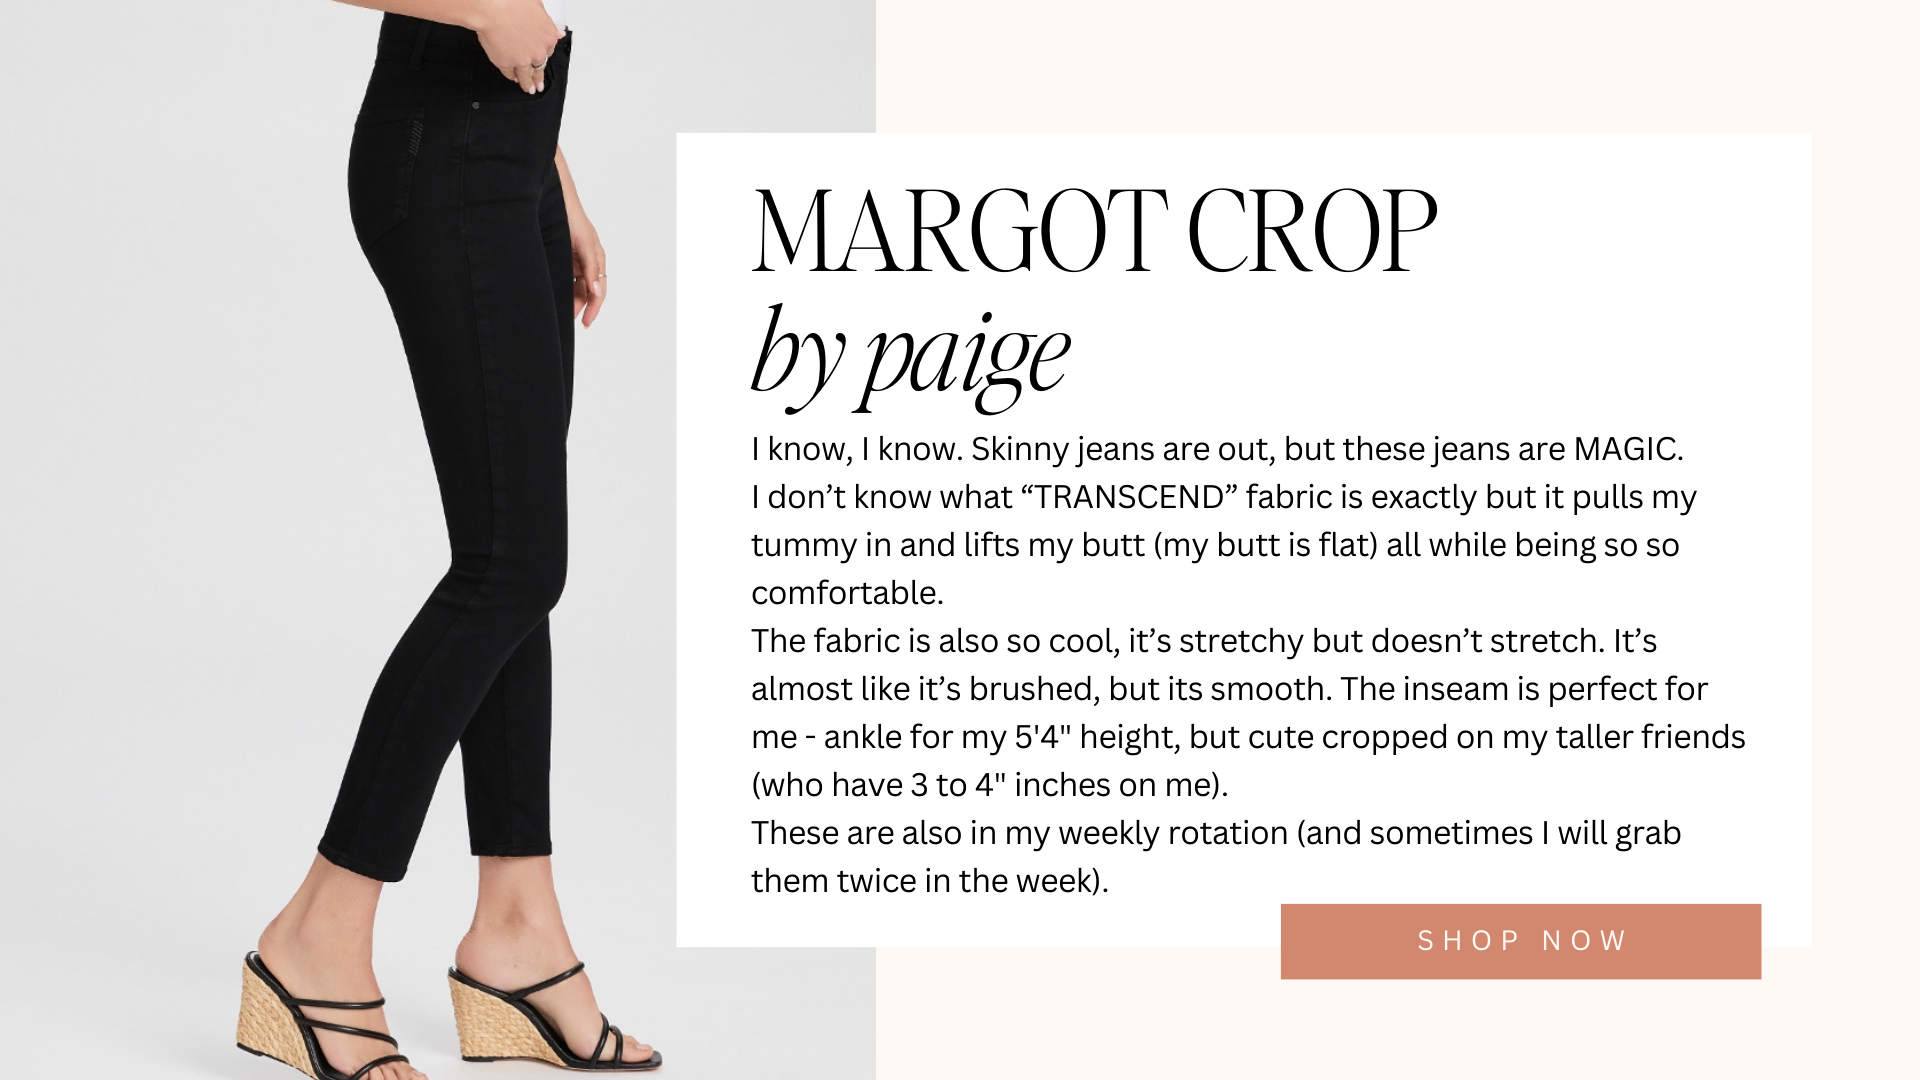 margot crop by paige | I know, I know. Skinny jeans are out, but these jeans are MAGIC. I don’t know what “TRANSCEND” fabric is exactly but it pulls my tummy in and lifts my butt (my butt is flat) all while being so so comfortable. The fabric is also so cool, it’s stretchy but doesn’t stretch. It’s almost like it’s brushed, but its smooth. The inseam is perfect for me - ankle for my 5'4" height, but cute cropped on my taller friends (who have 3 to 4" inches on me). These are also in my weekly rotation (and sometimes I will grab them twice in the week). | shop now